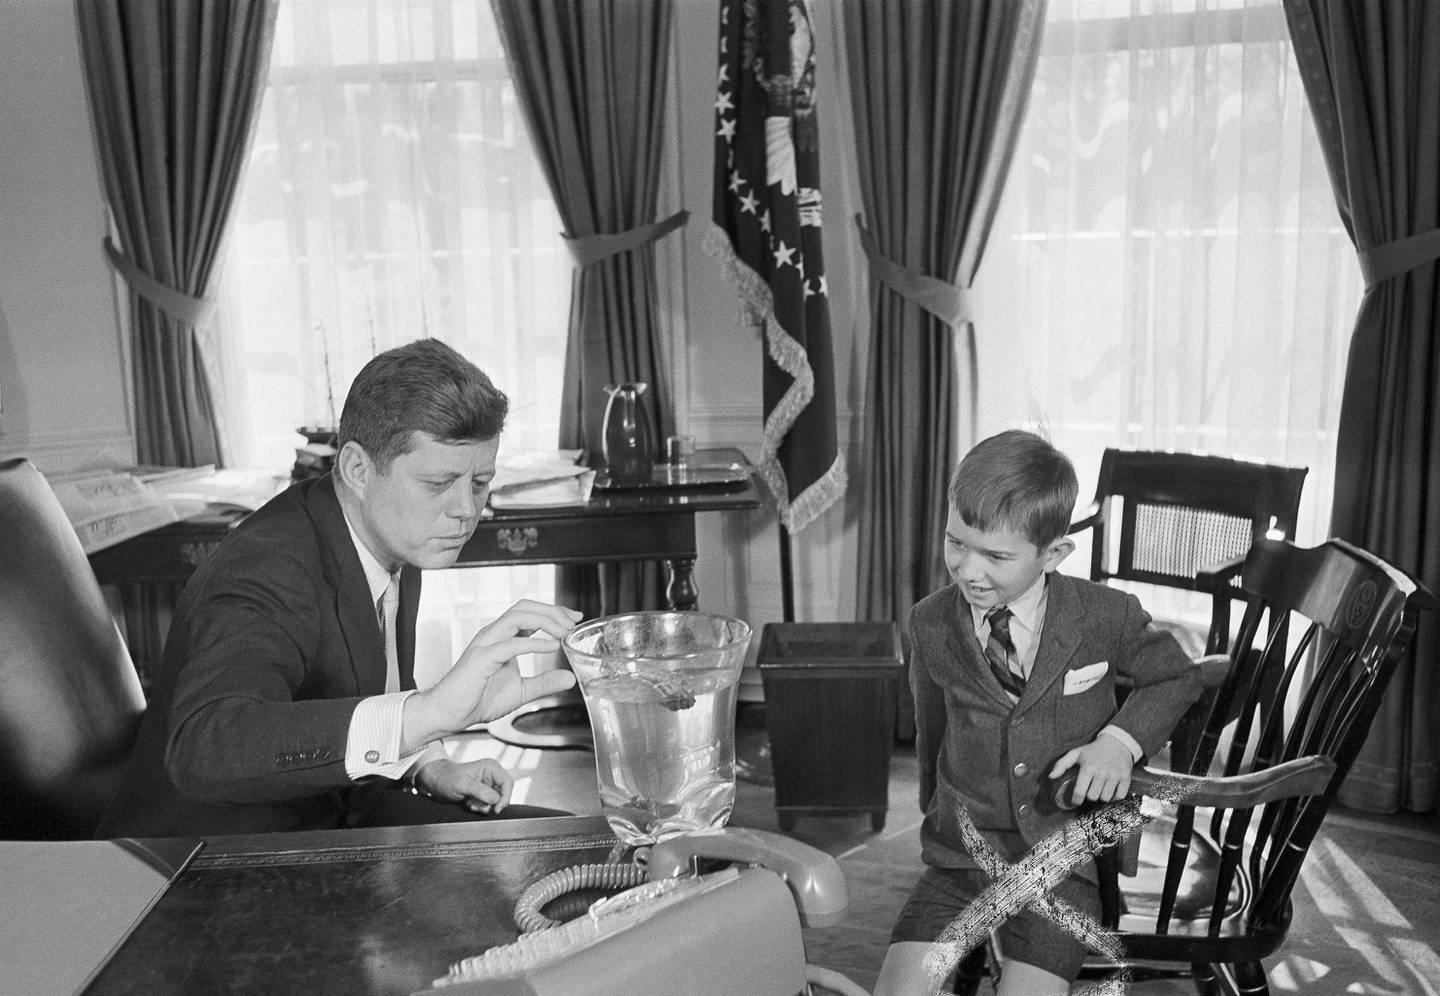 Robert Kennedy, Jr. 7, lifts a salamander named Shadrach from a vase in Uncle John F. Kennedy's presidential office March 11, 1961. Bobby who is the son of the Attorney General, showed up at the White House to give the reptile to the President, after first obtaining an official appointment. (AP Photo)